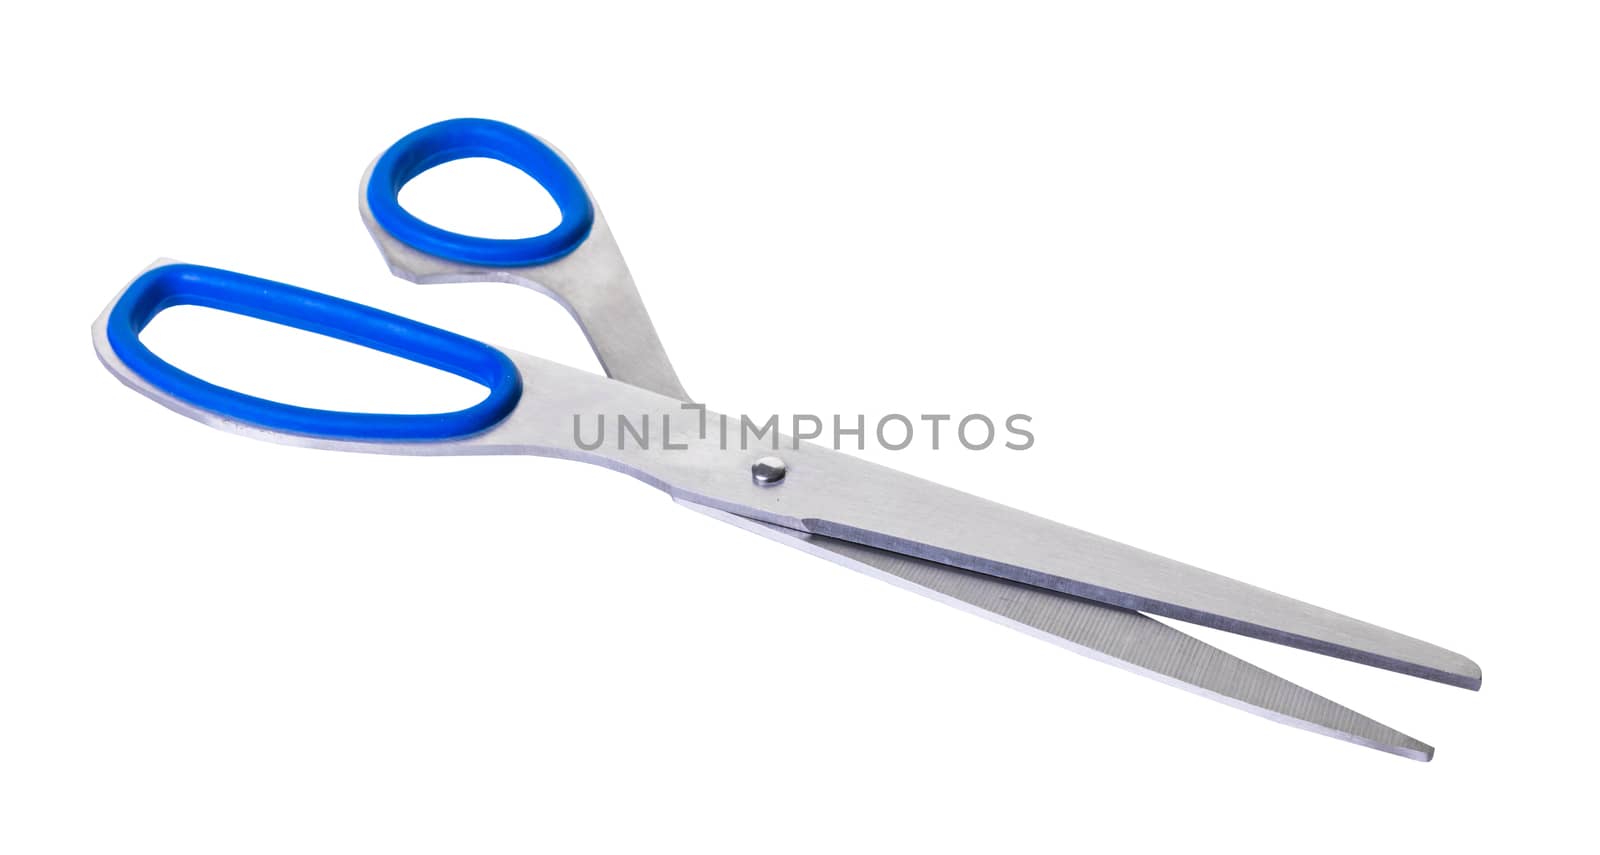 sewing scissors close-up on white isolated background